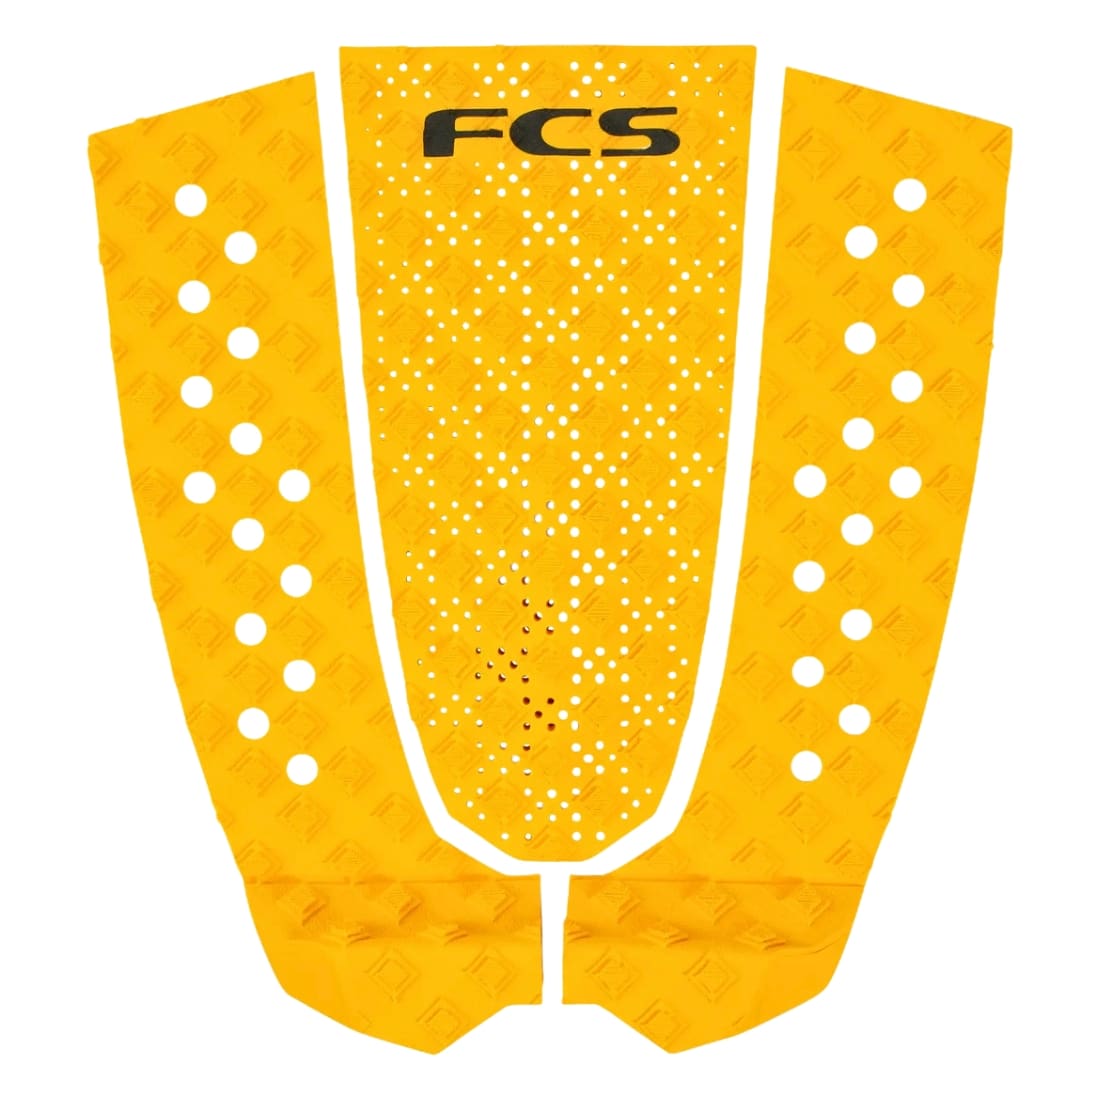 FCS T-3 Eco 3 Piece Surfboard Tail Pad - Mango - 3 Piece Tail Pad by FCS